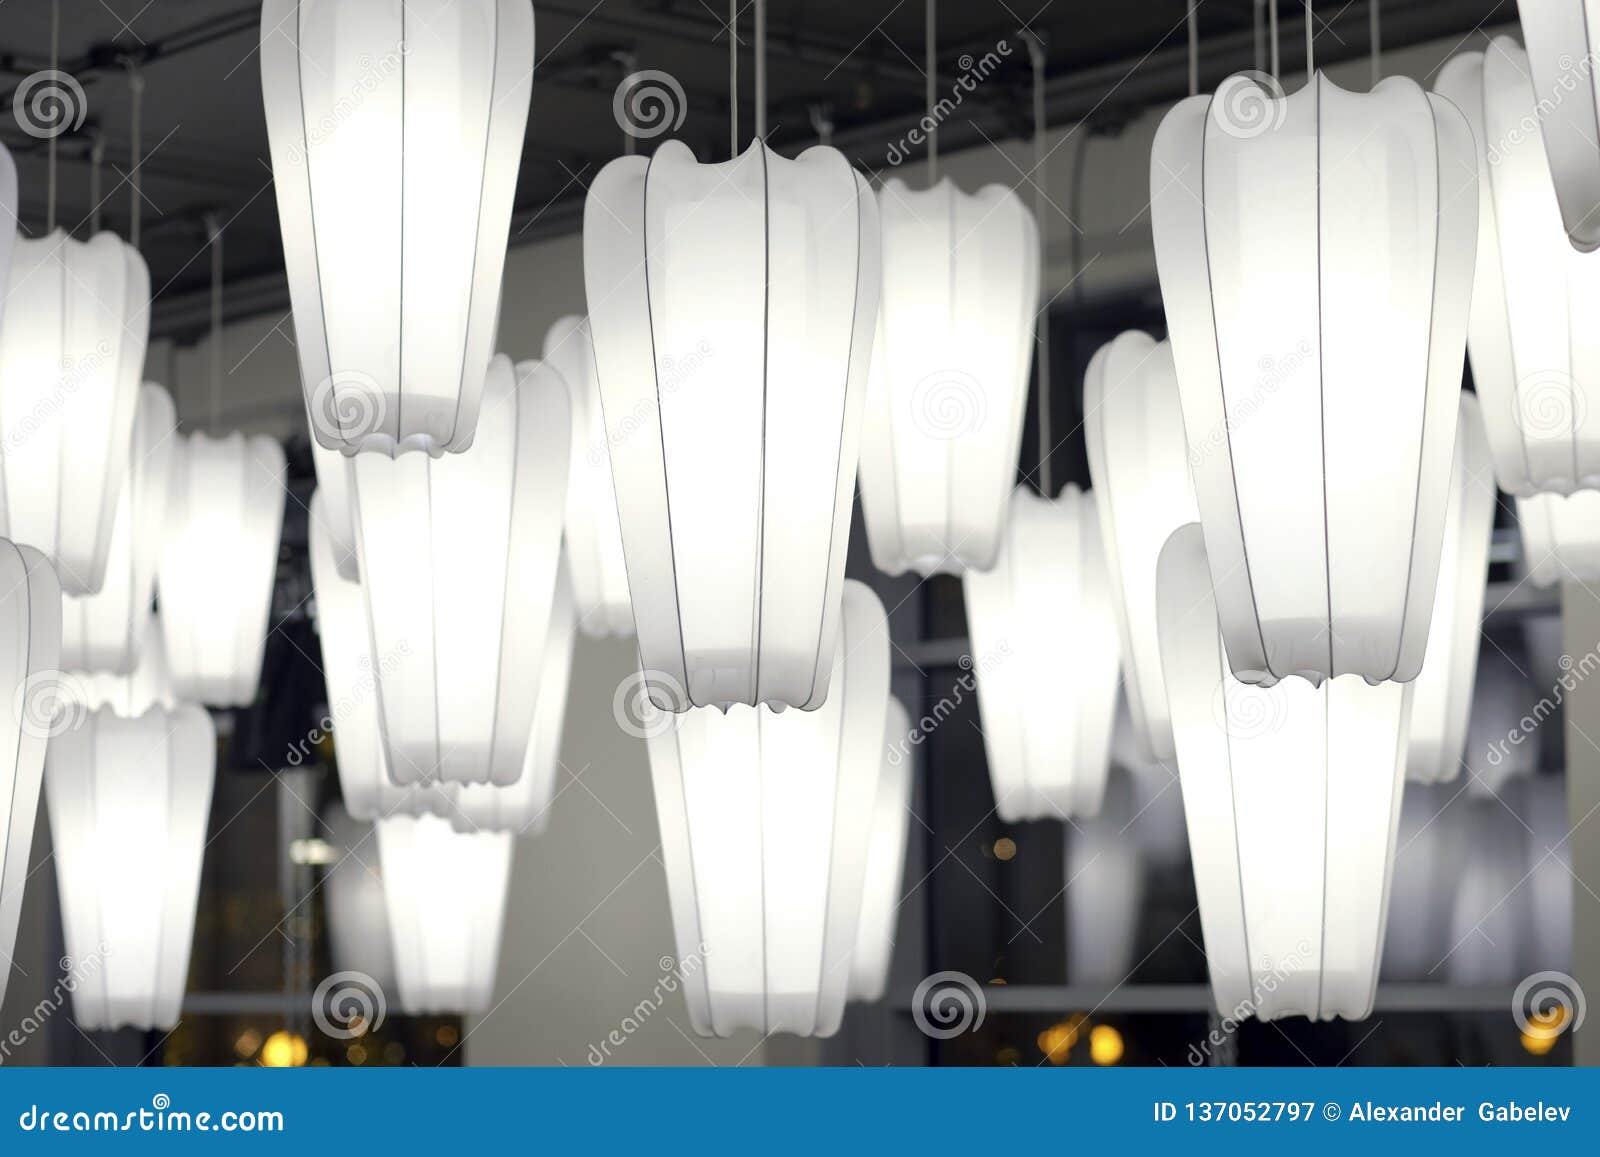 White Paper Lamp Hanging On The Ceiling In Dark Tone Stock Image